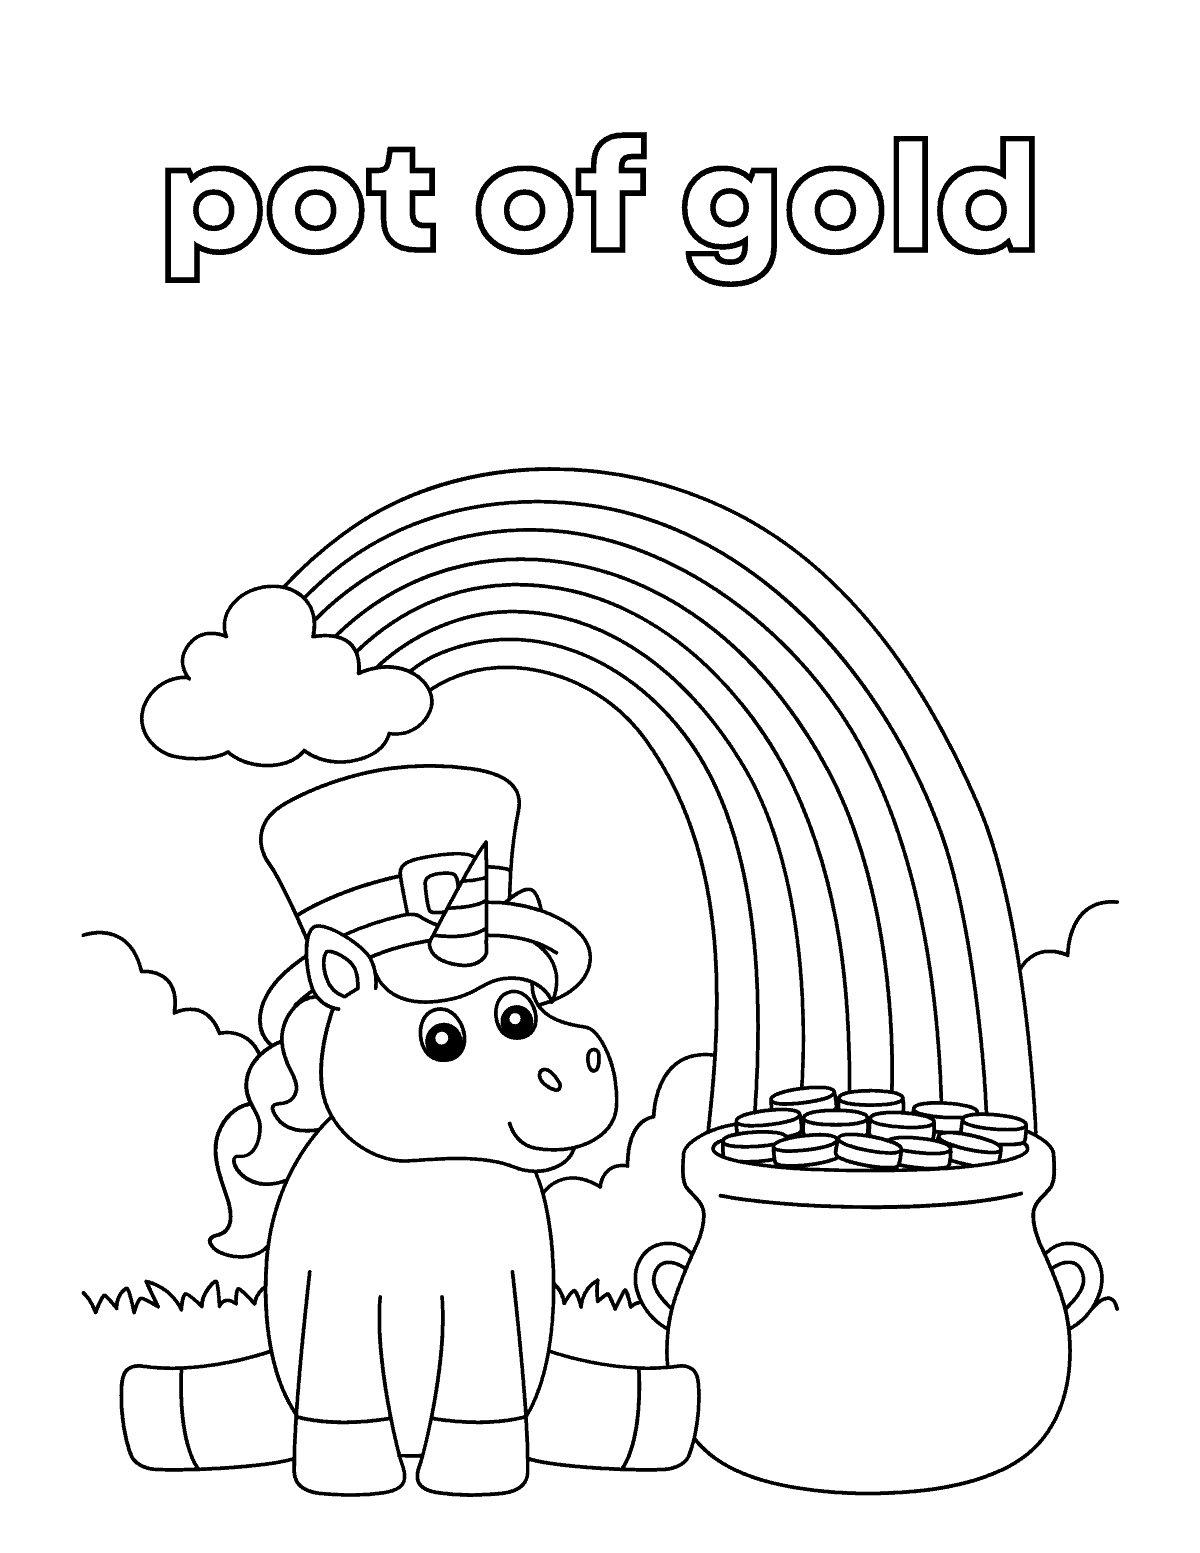 Unicorn with rainbow and pot of gold Coloring Activity for Kids